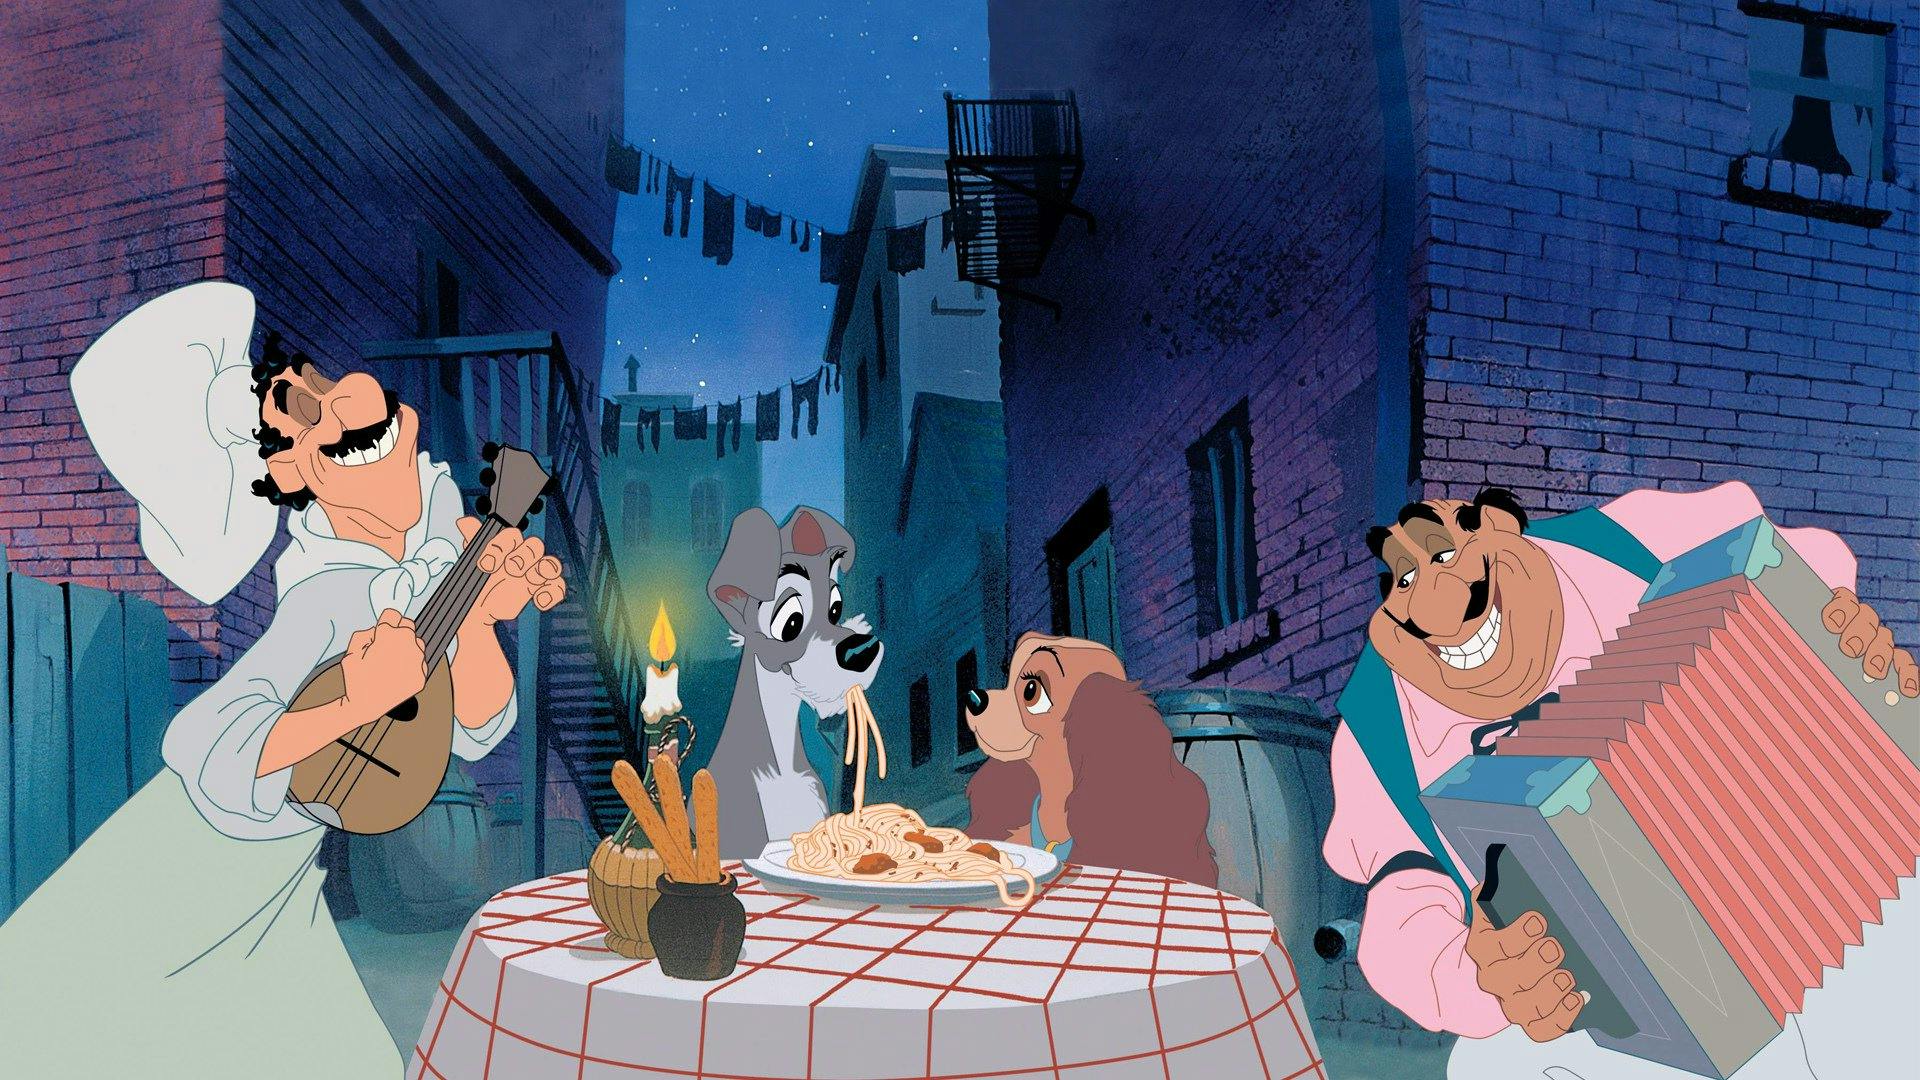 Should I Watch..? 'Lady and the Tramp' (1955) - HubPages